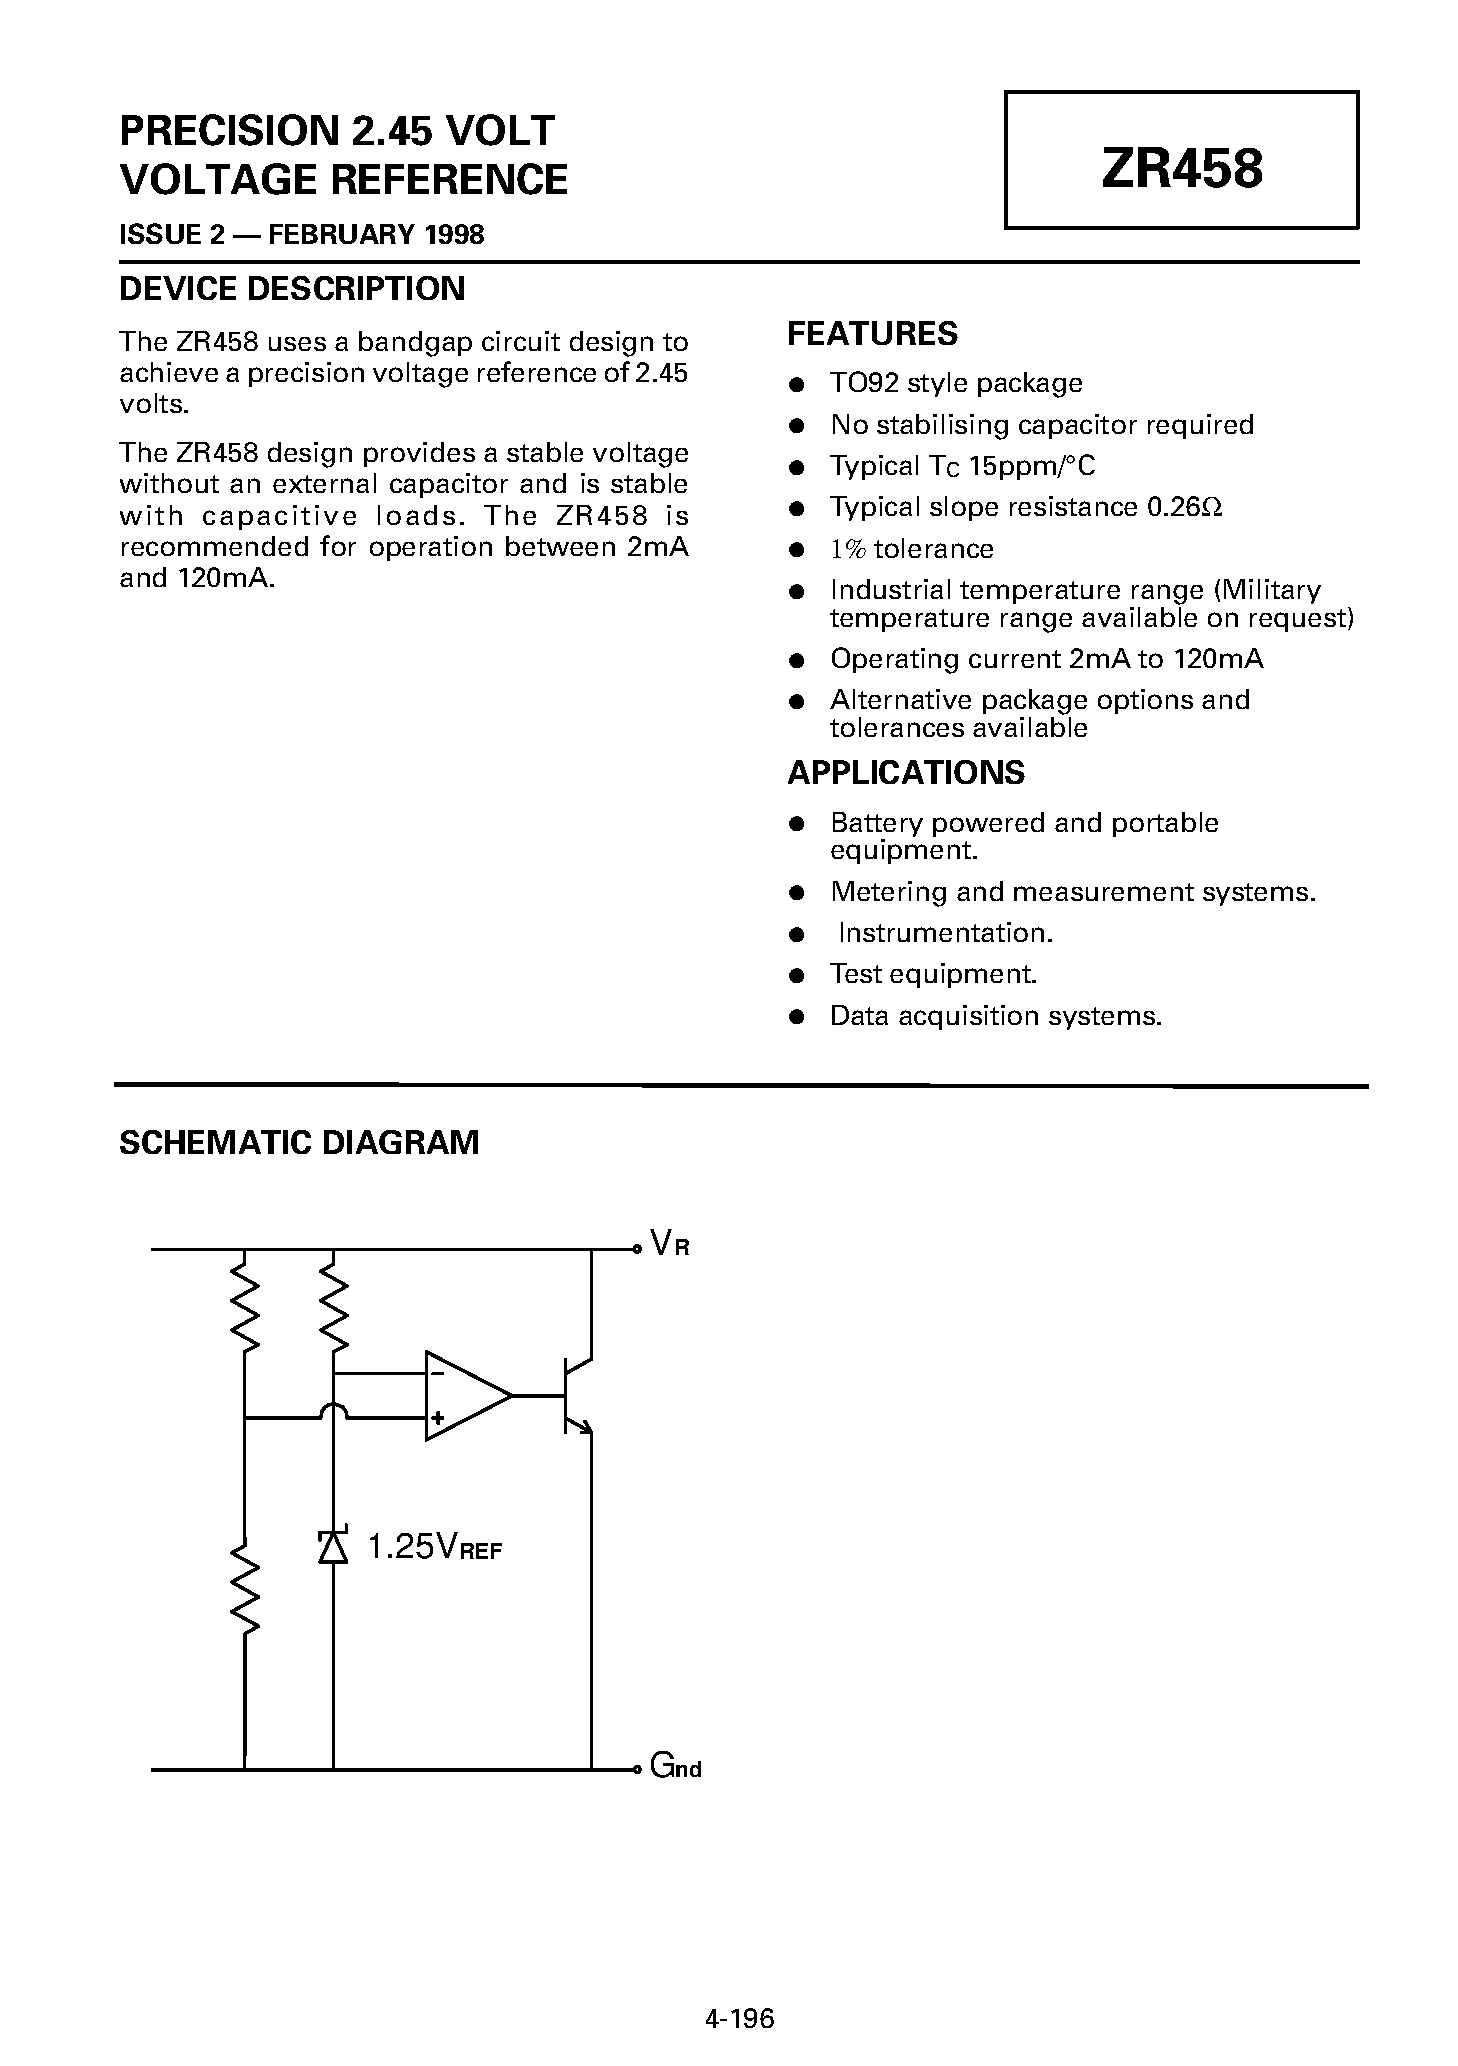 Datasheet ZR458A - PRECISION 2.45 VOLT VOLTAGE REFERENCE page 1